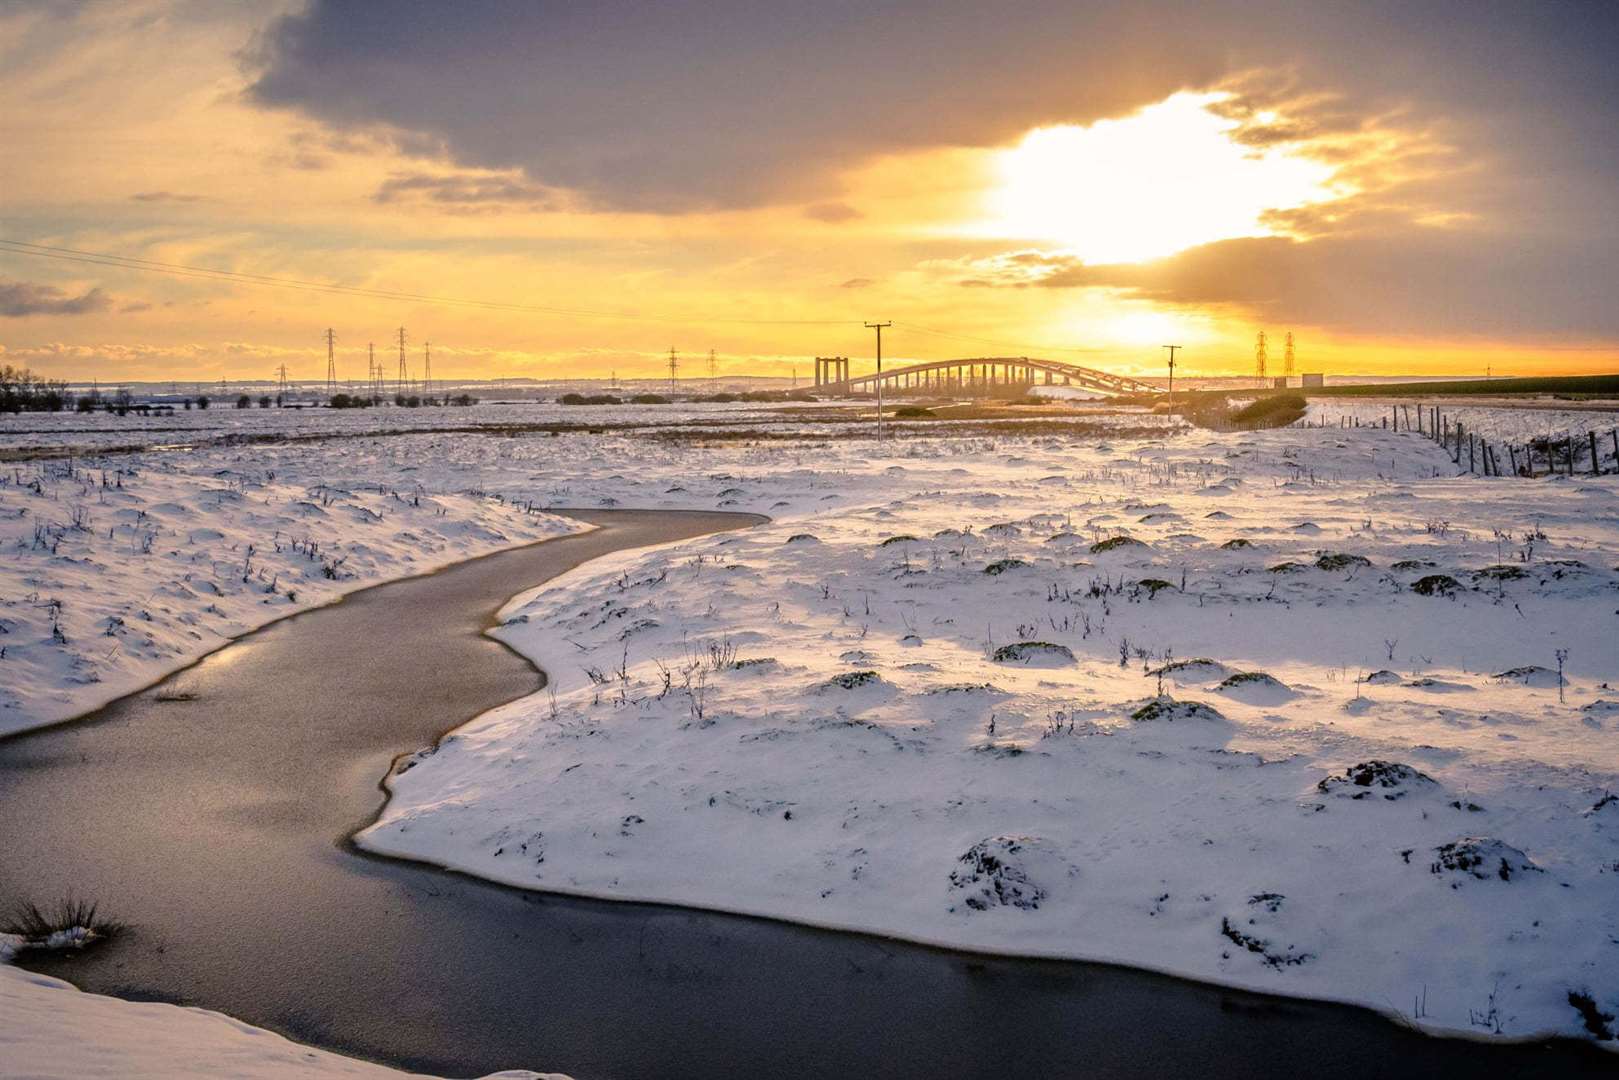 Sunset and snow of the Isle of Sheppey captured by Joanna Araujo